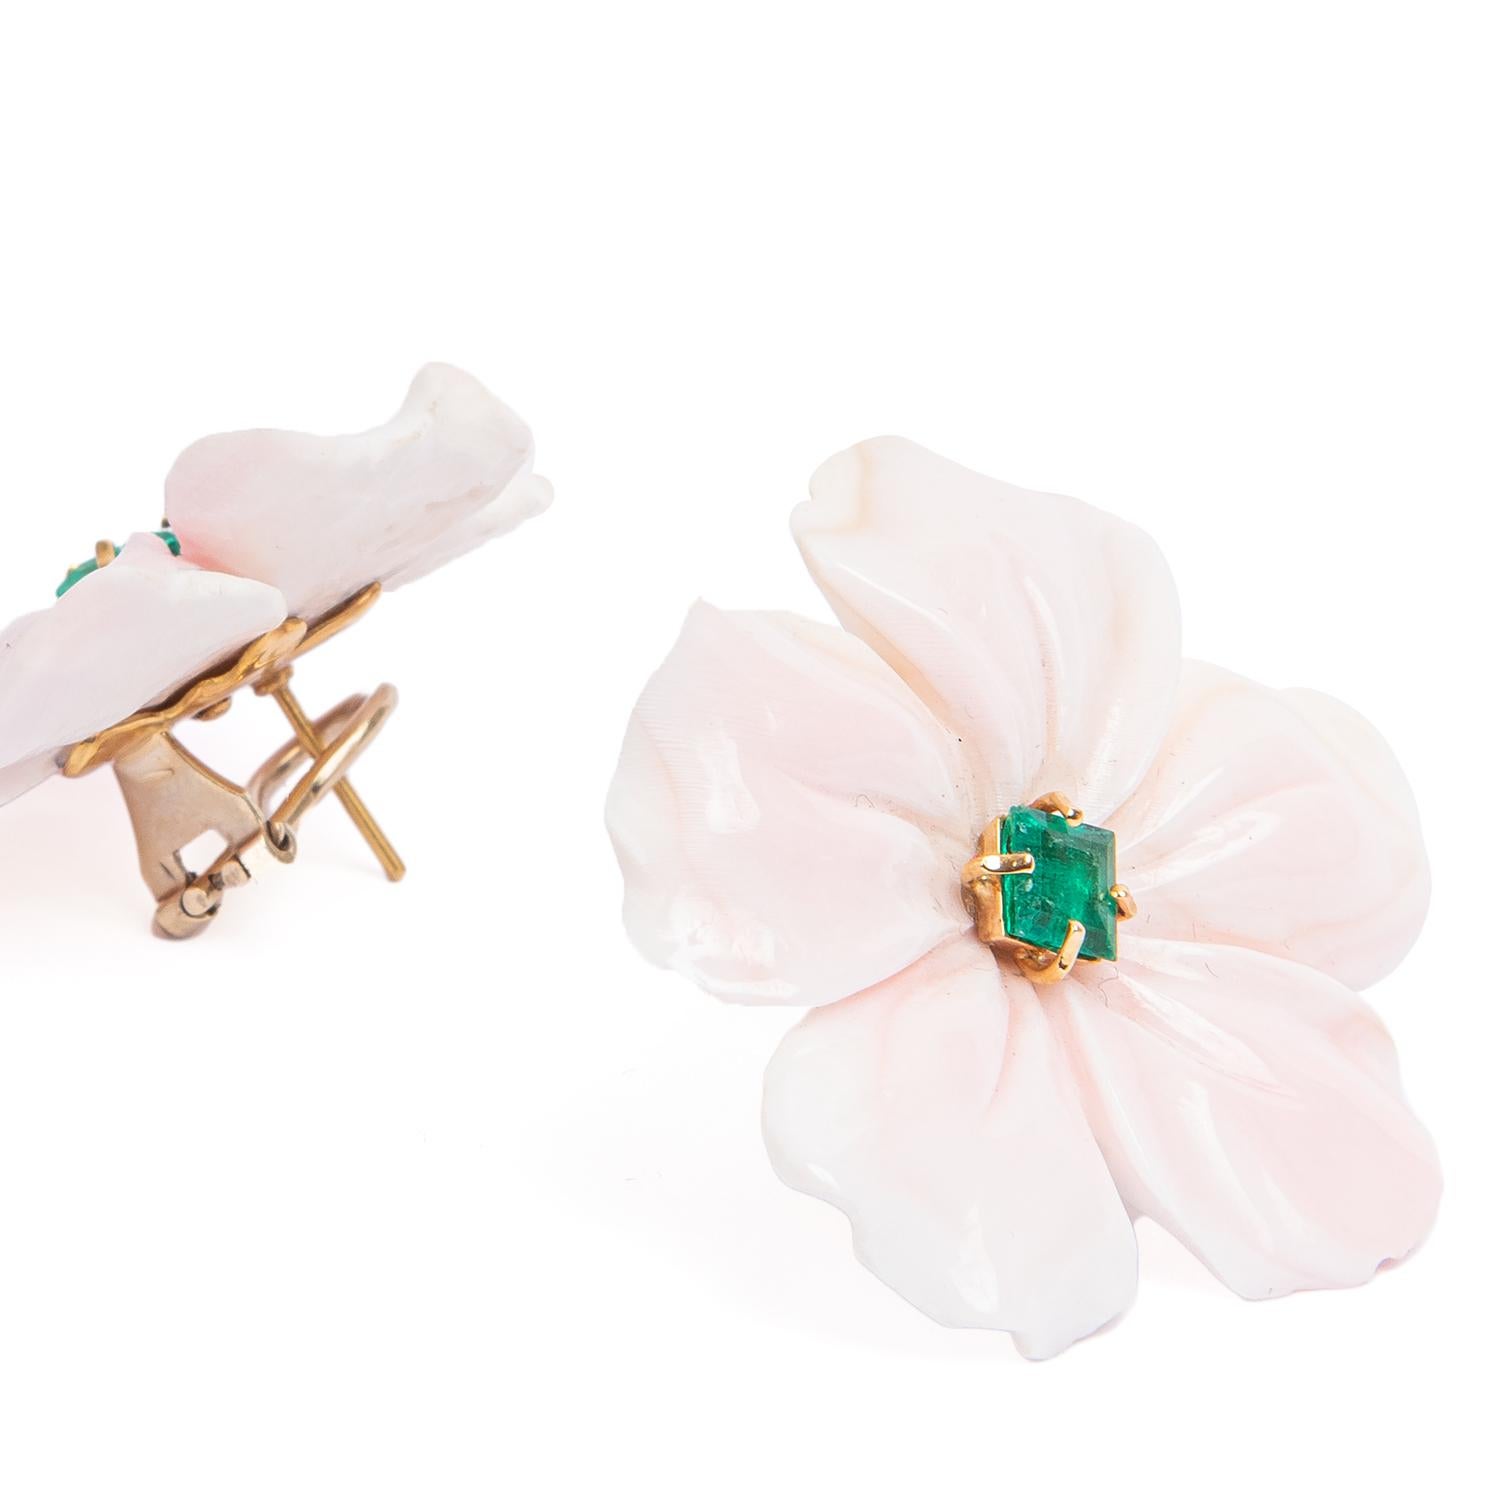 Artist Regina Gambatesa Shell Flower earrings with Gold and Emerald For Sale